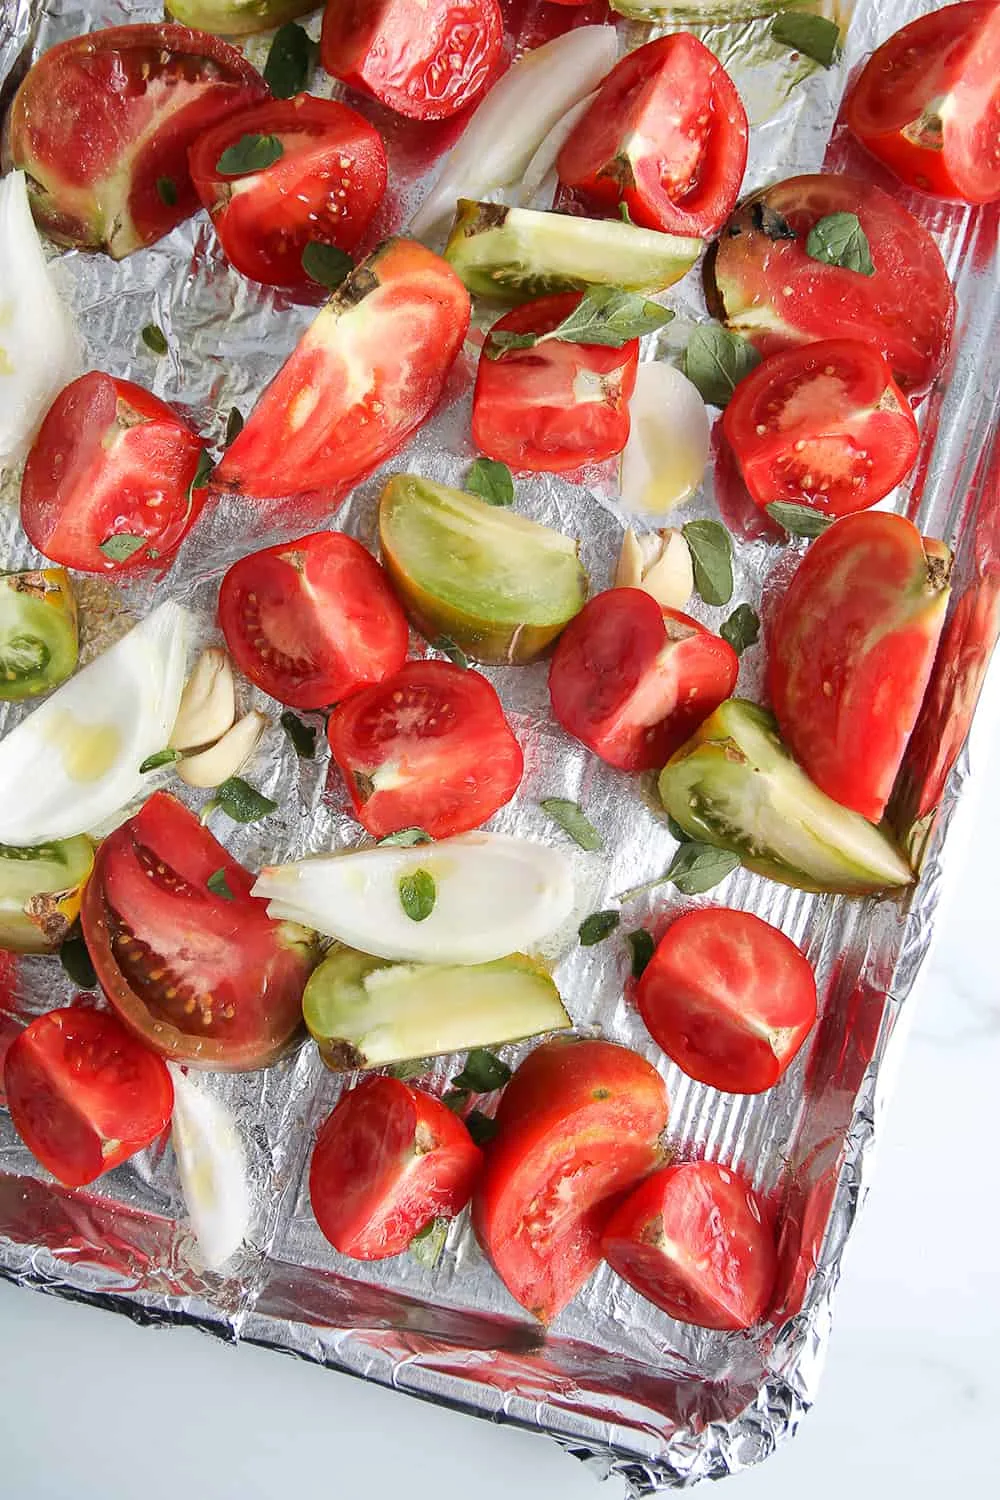 Fresh tomatoes and onions on a foil-lined sheet pan, ready to roast